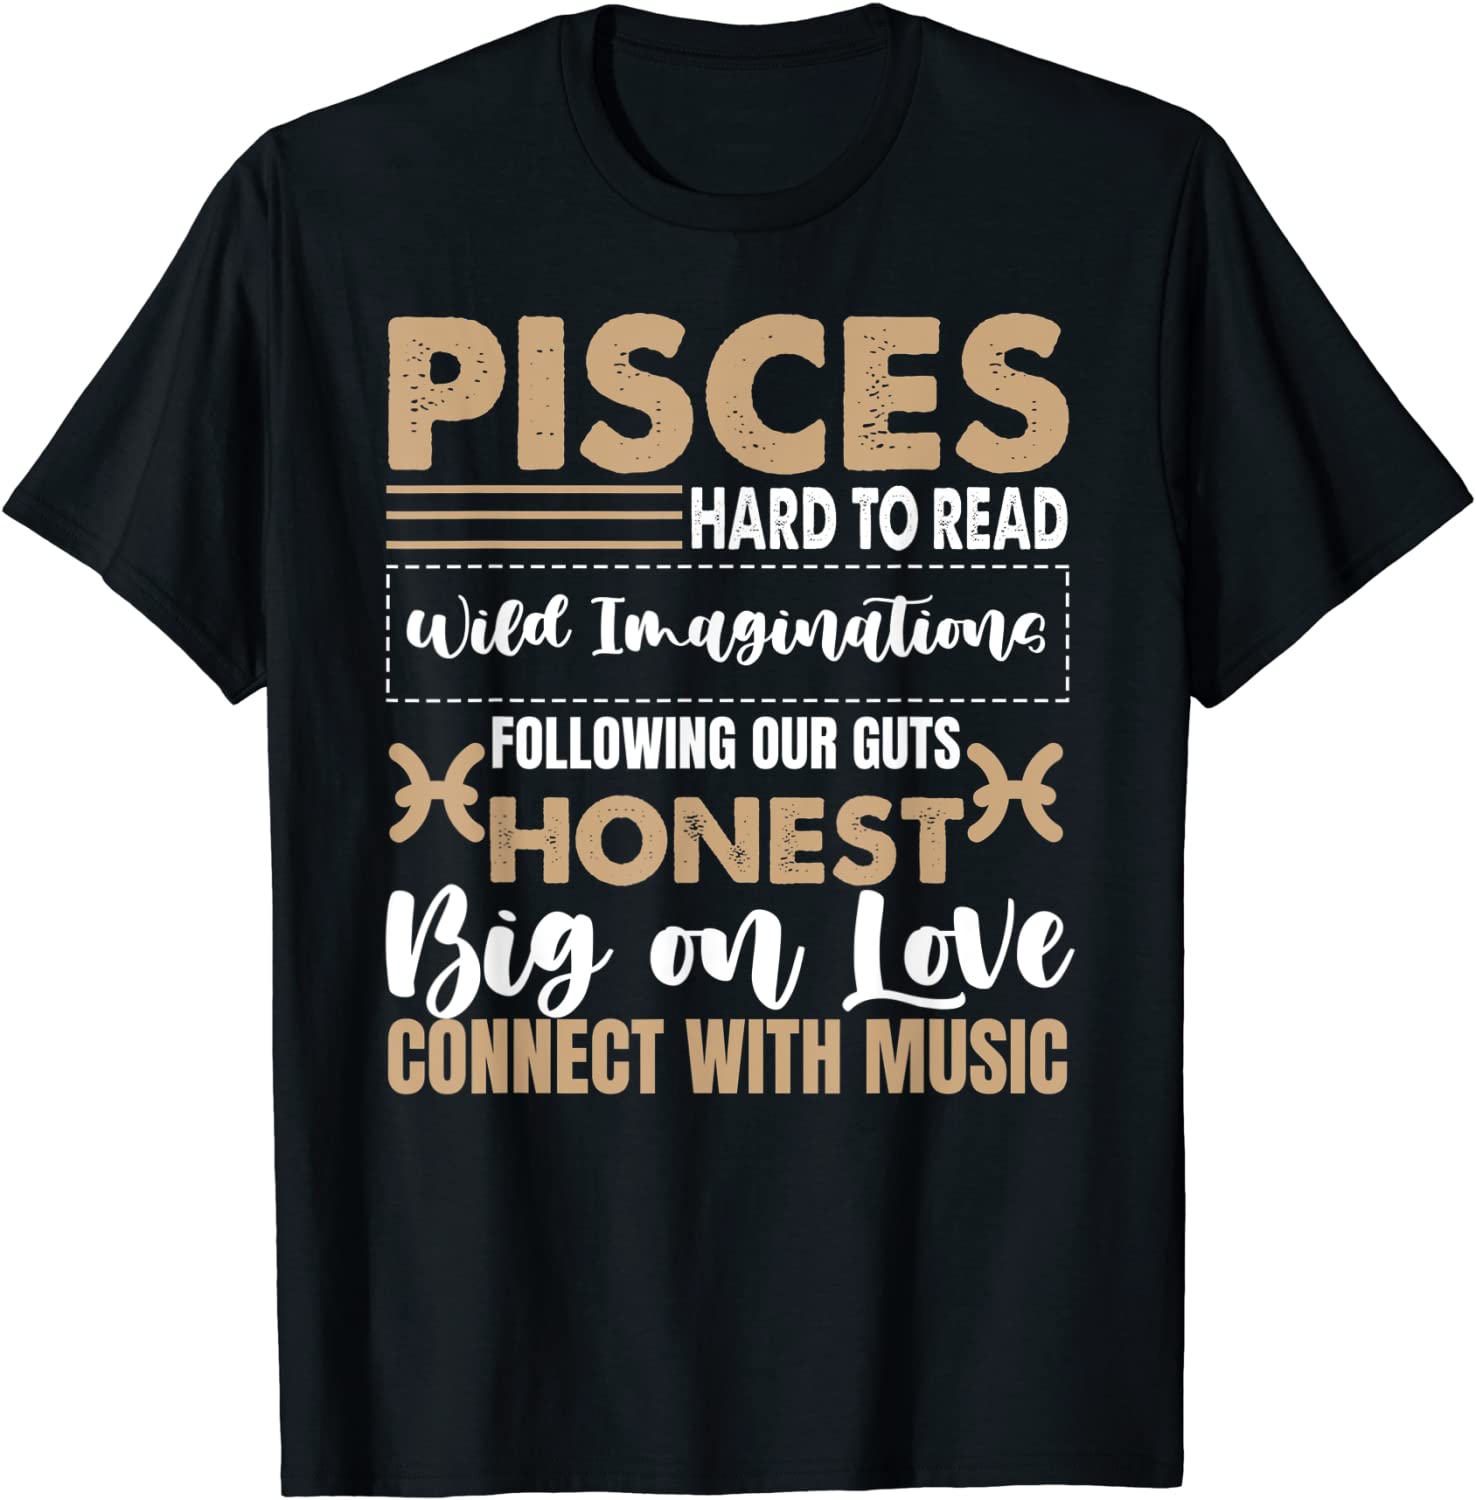 Pisces Zodiac Sign Horoscope Facts Funny Vintage Personality Cotton T-shirt  for Men and Women Tee Shirts Adults Short Sleeve Tshirts | Lazada PH